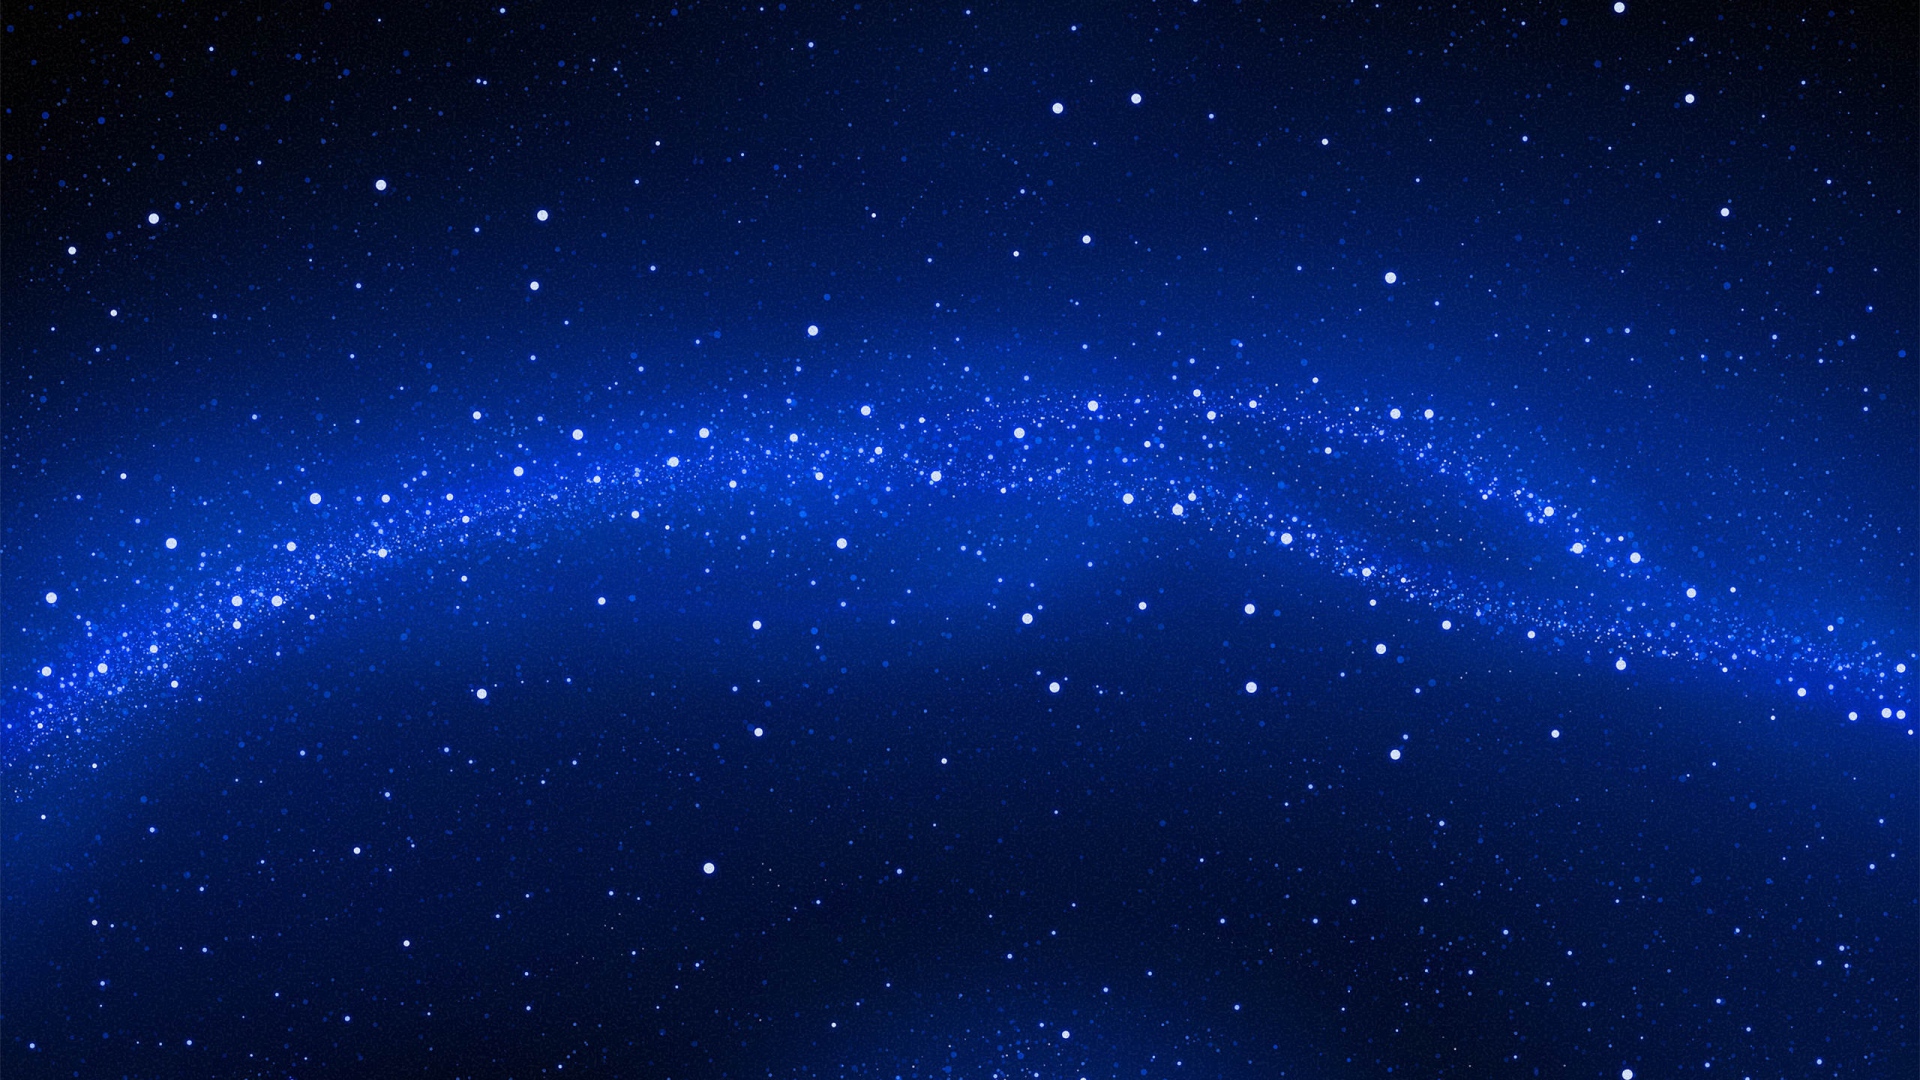  space stars blue background from wallpapers4uorg your wallpaper